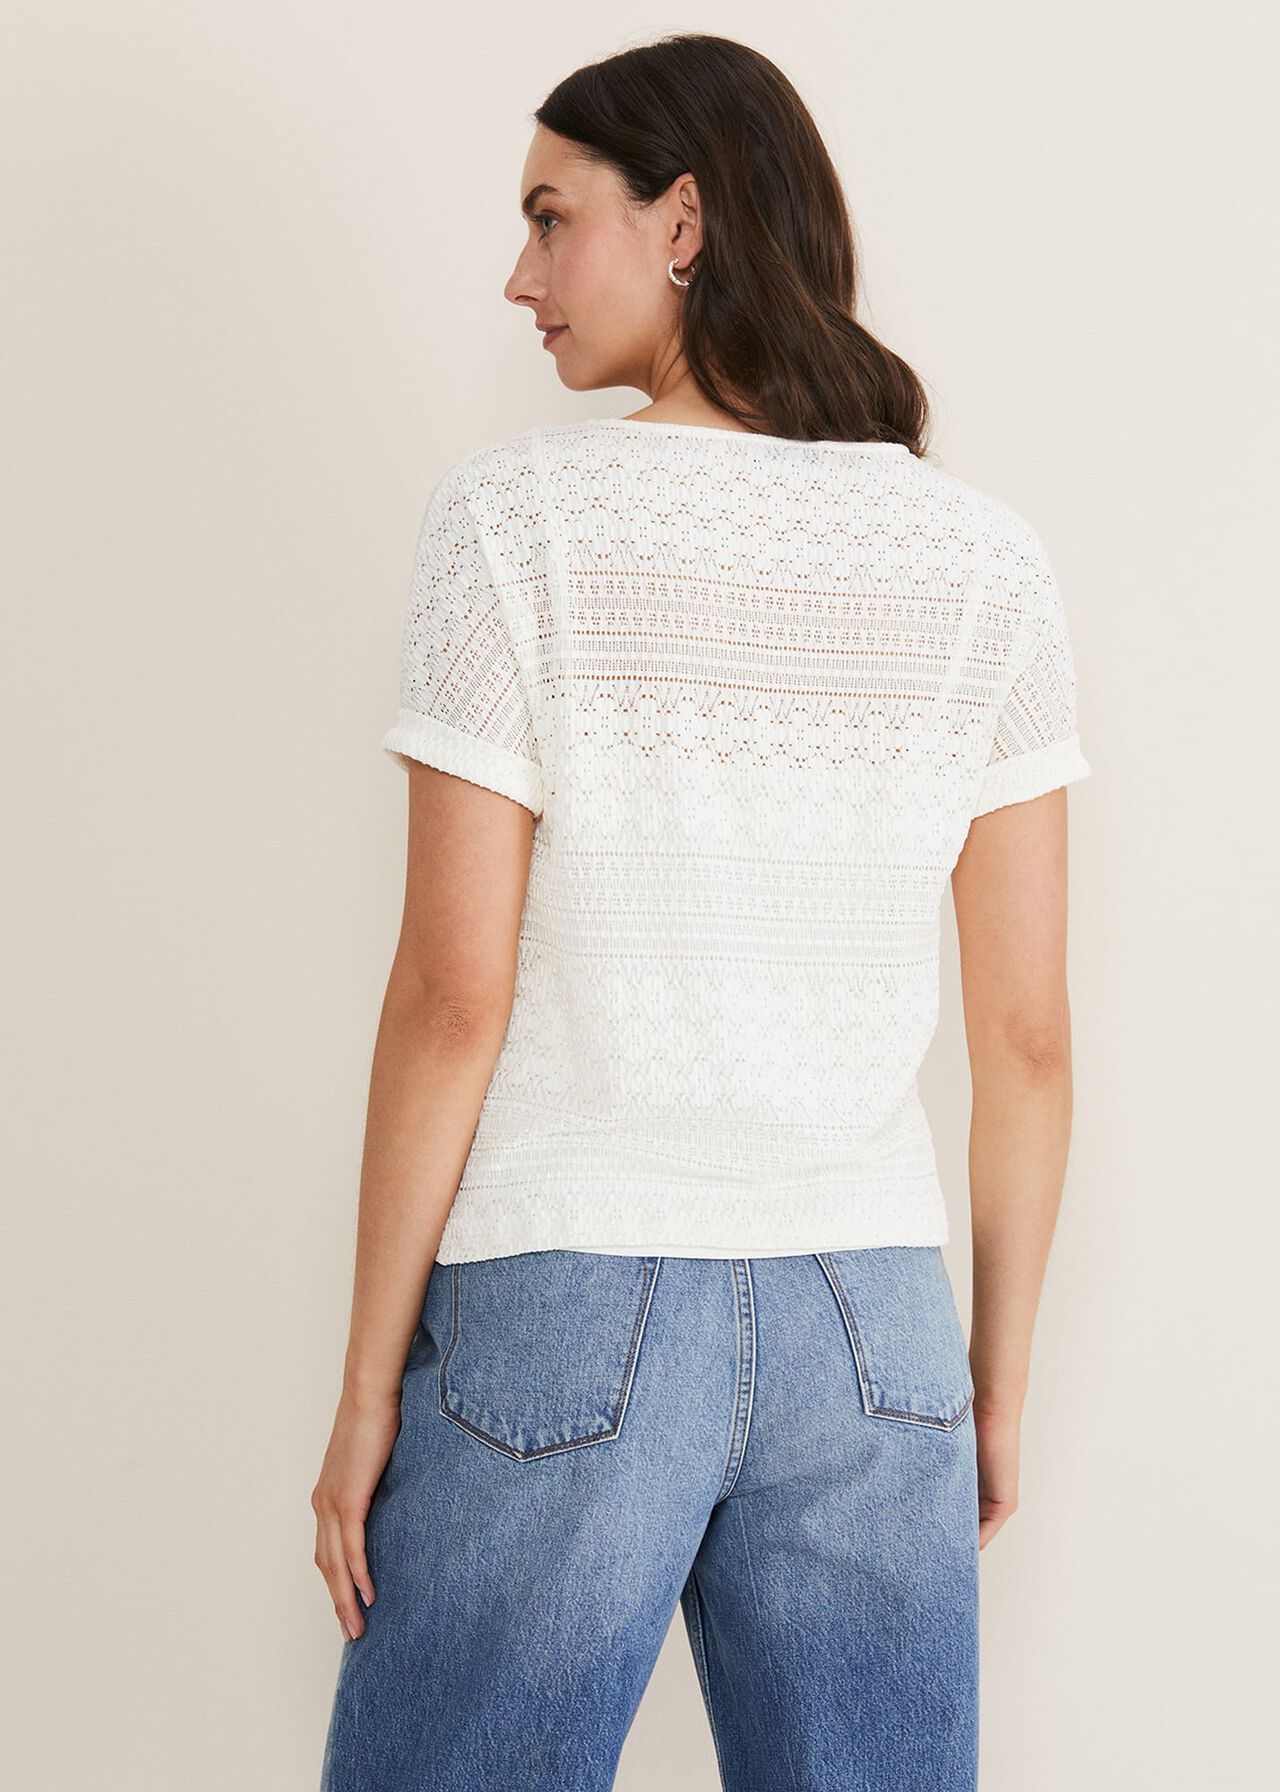 Emmlyn Lace Textured  Top